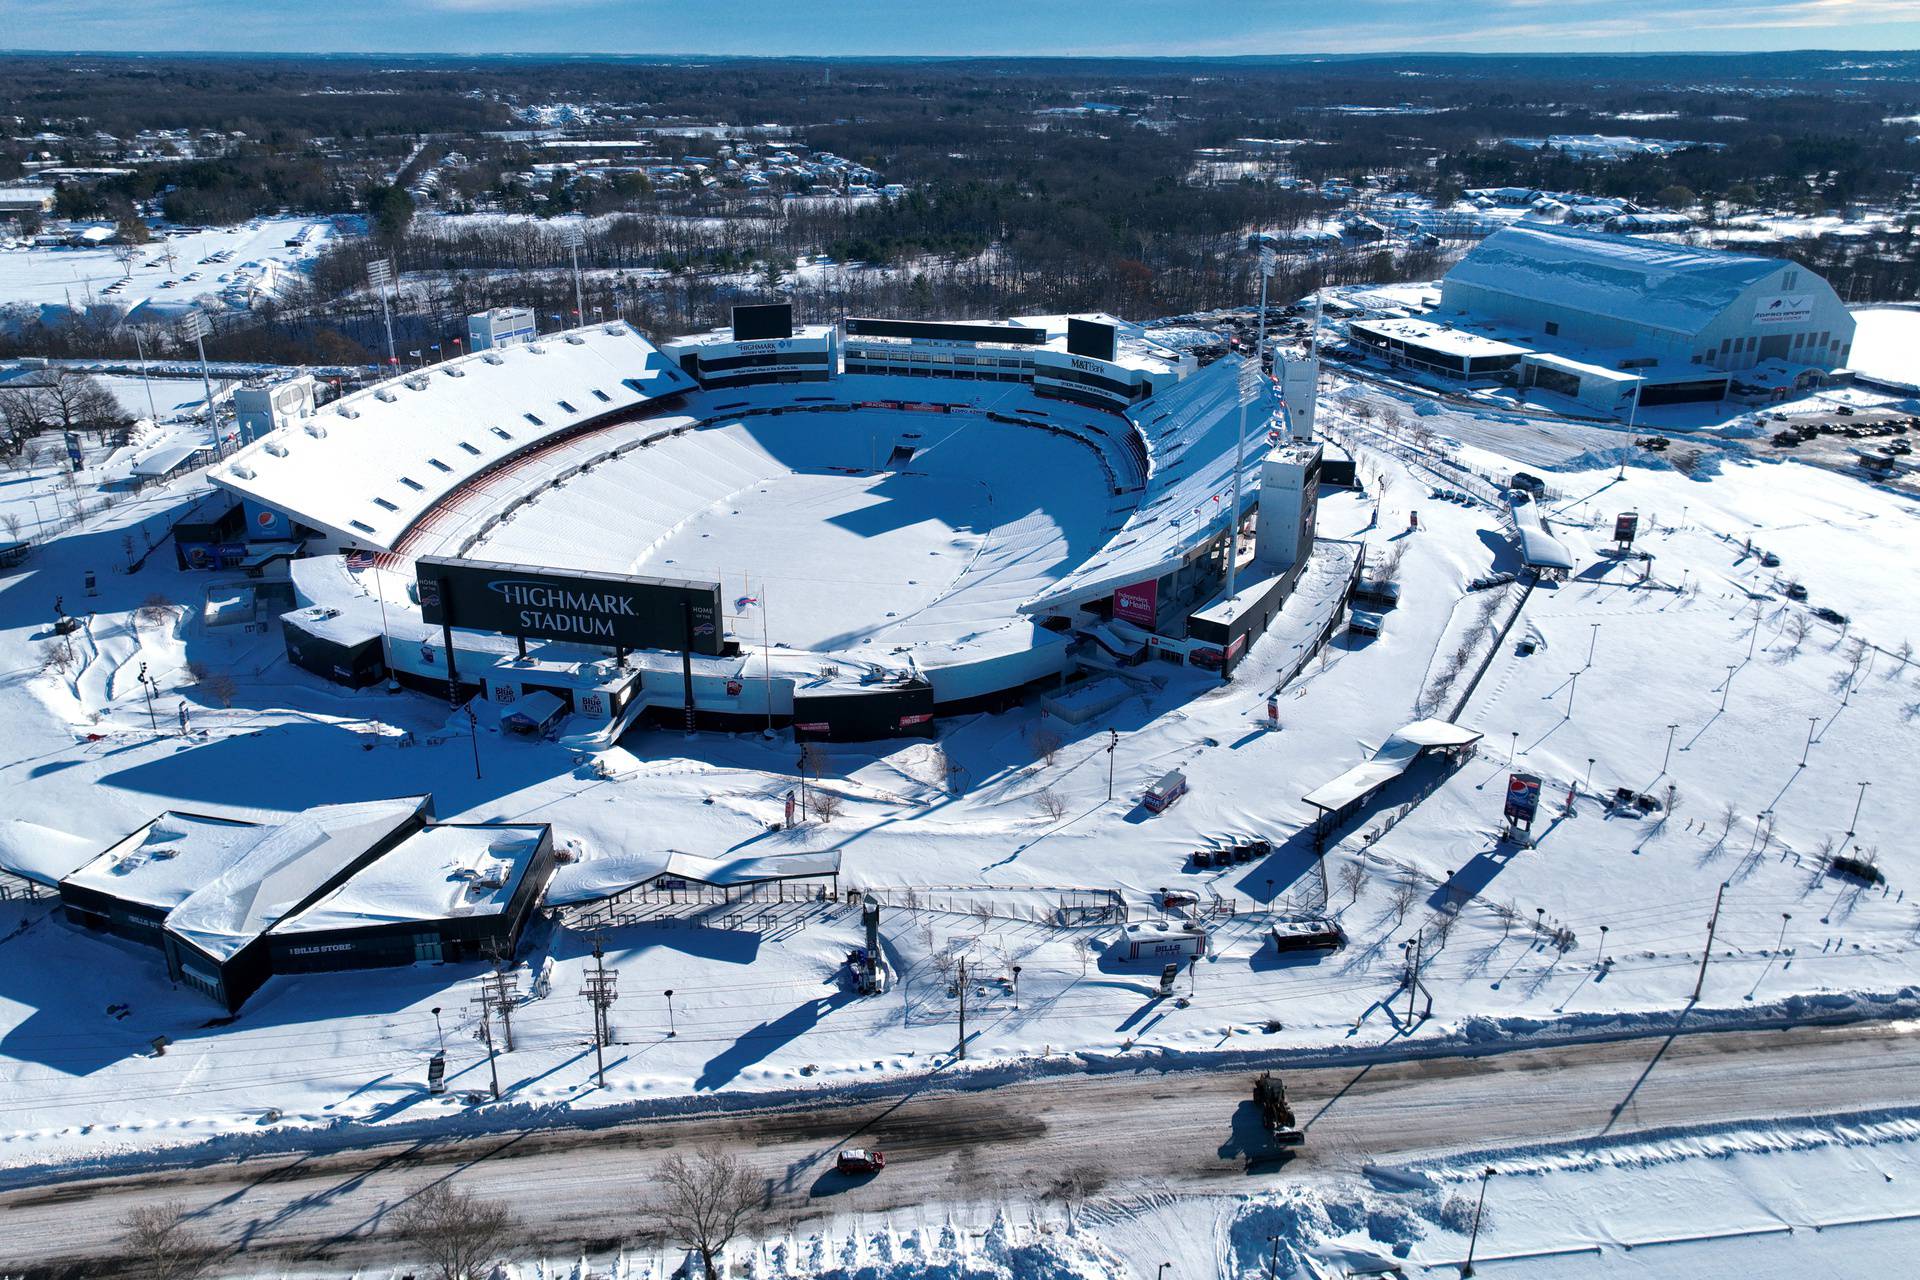 The Buffalo Bills' NFL team's Highmark Stadium is covered in snow after a recent storm in Orchard Park